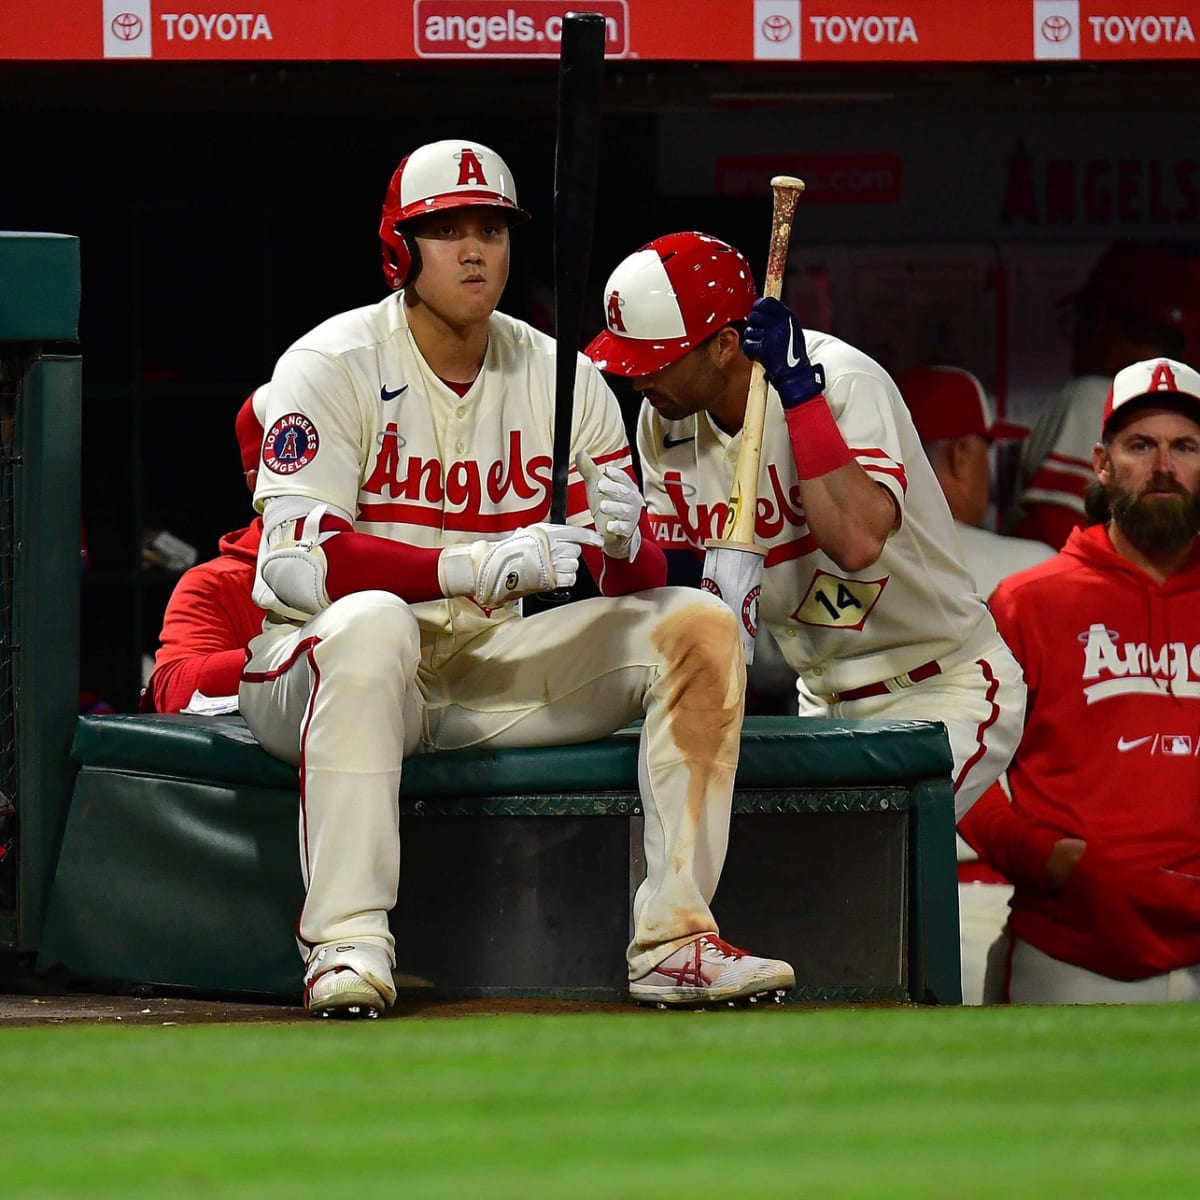 What the New York Mets would have to give up in Shohei Ohtani